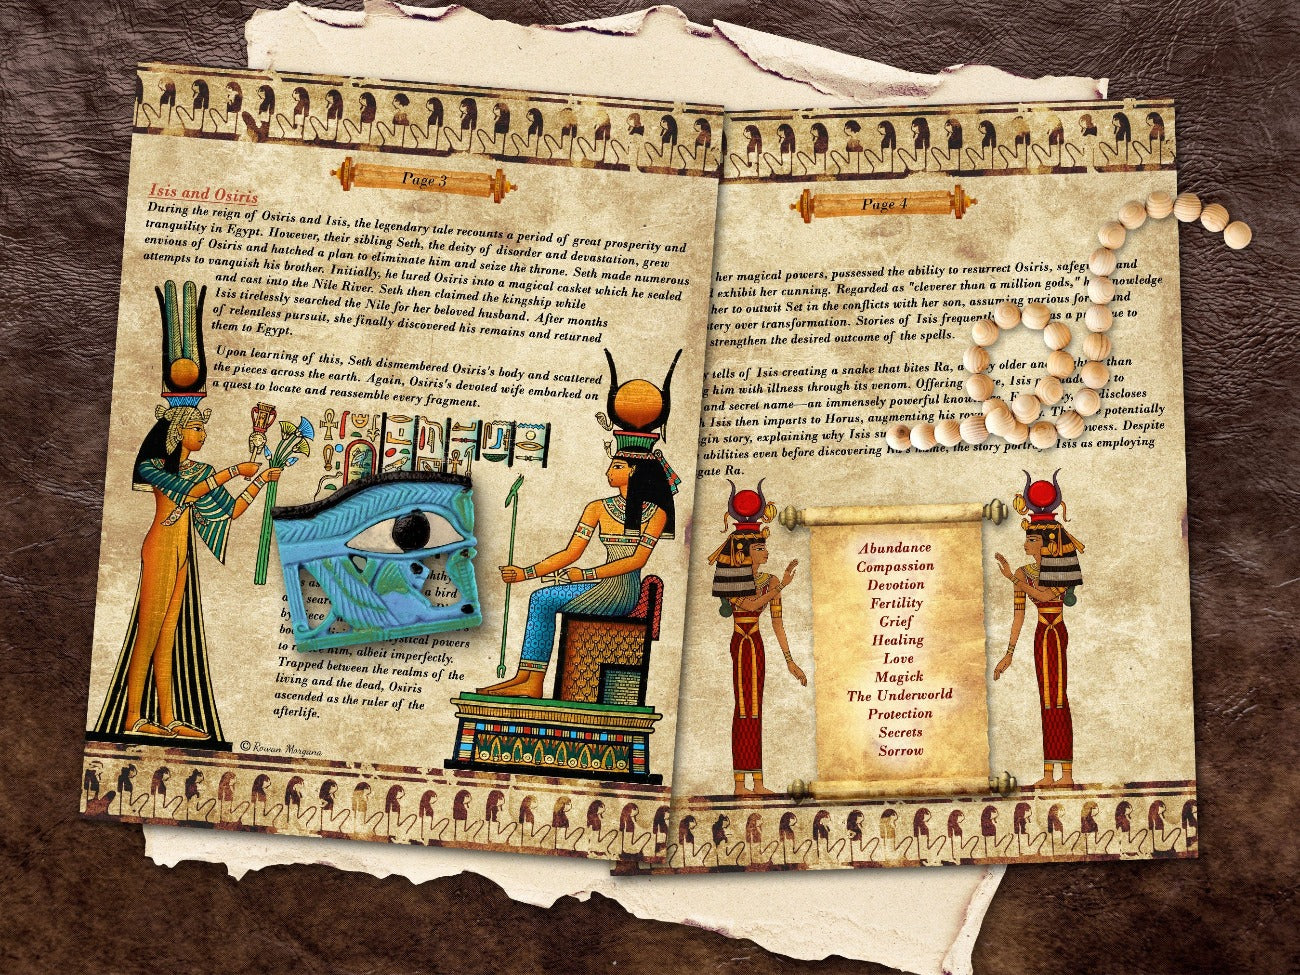 GODDESS ISIS 6 Pages, Isis and Osiris, Lore and Mythology, Egyptian Goddess of Healing & Magic, Isis Wings, Printable Grimoire Altar Guide - Morgana Magick Spell